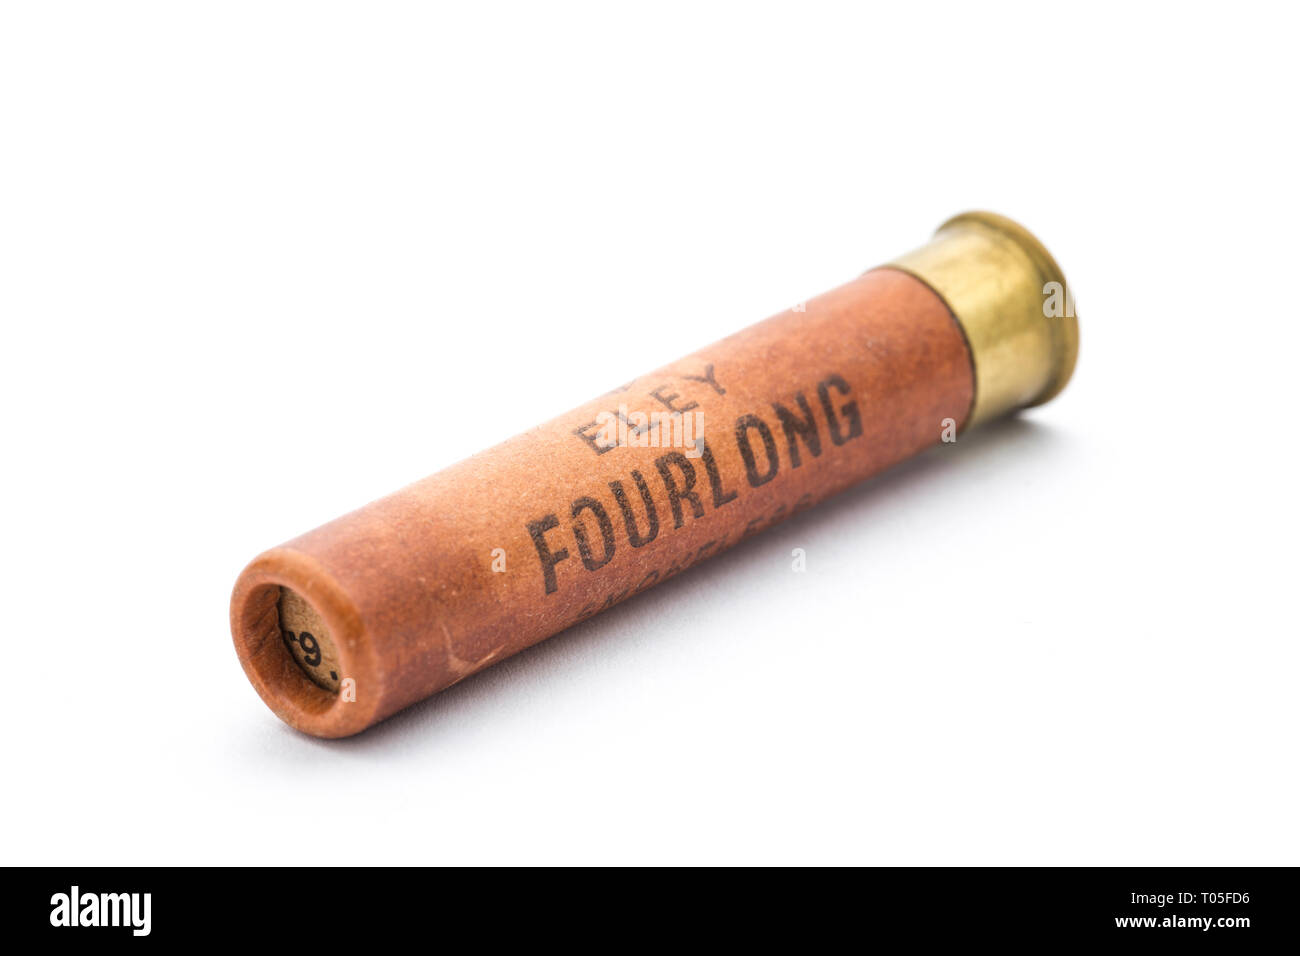 An old paper cased Eley Fourlong .410 shotgun cartridge loaded with No 6 lead shotgun pellets. Collecting shotgun cartridges is a hobby that can be fo Stock Photo